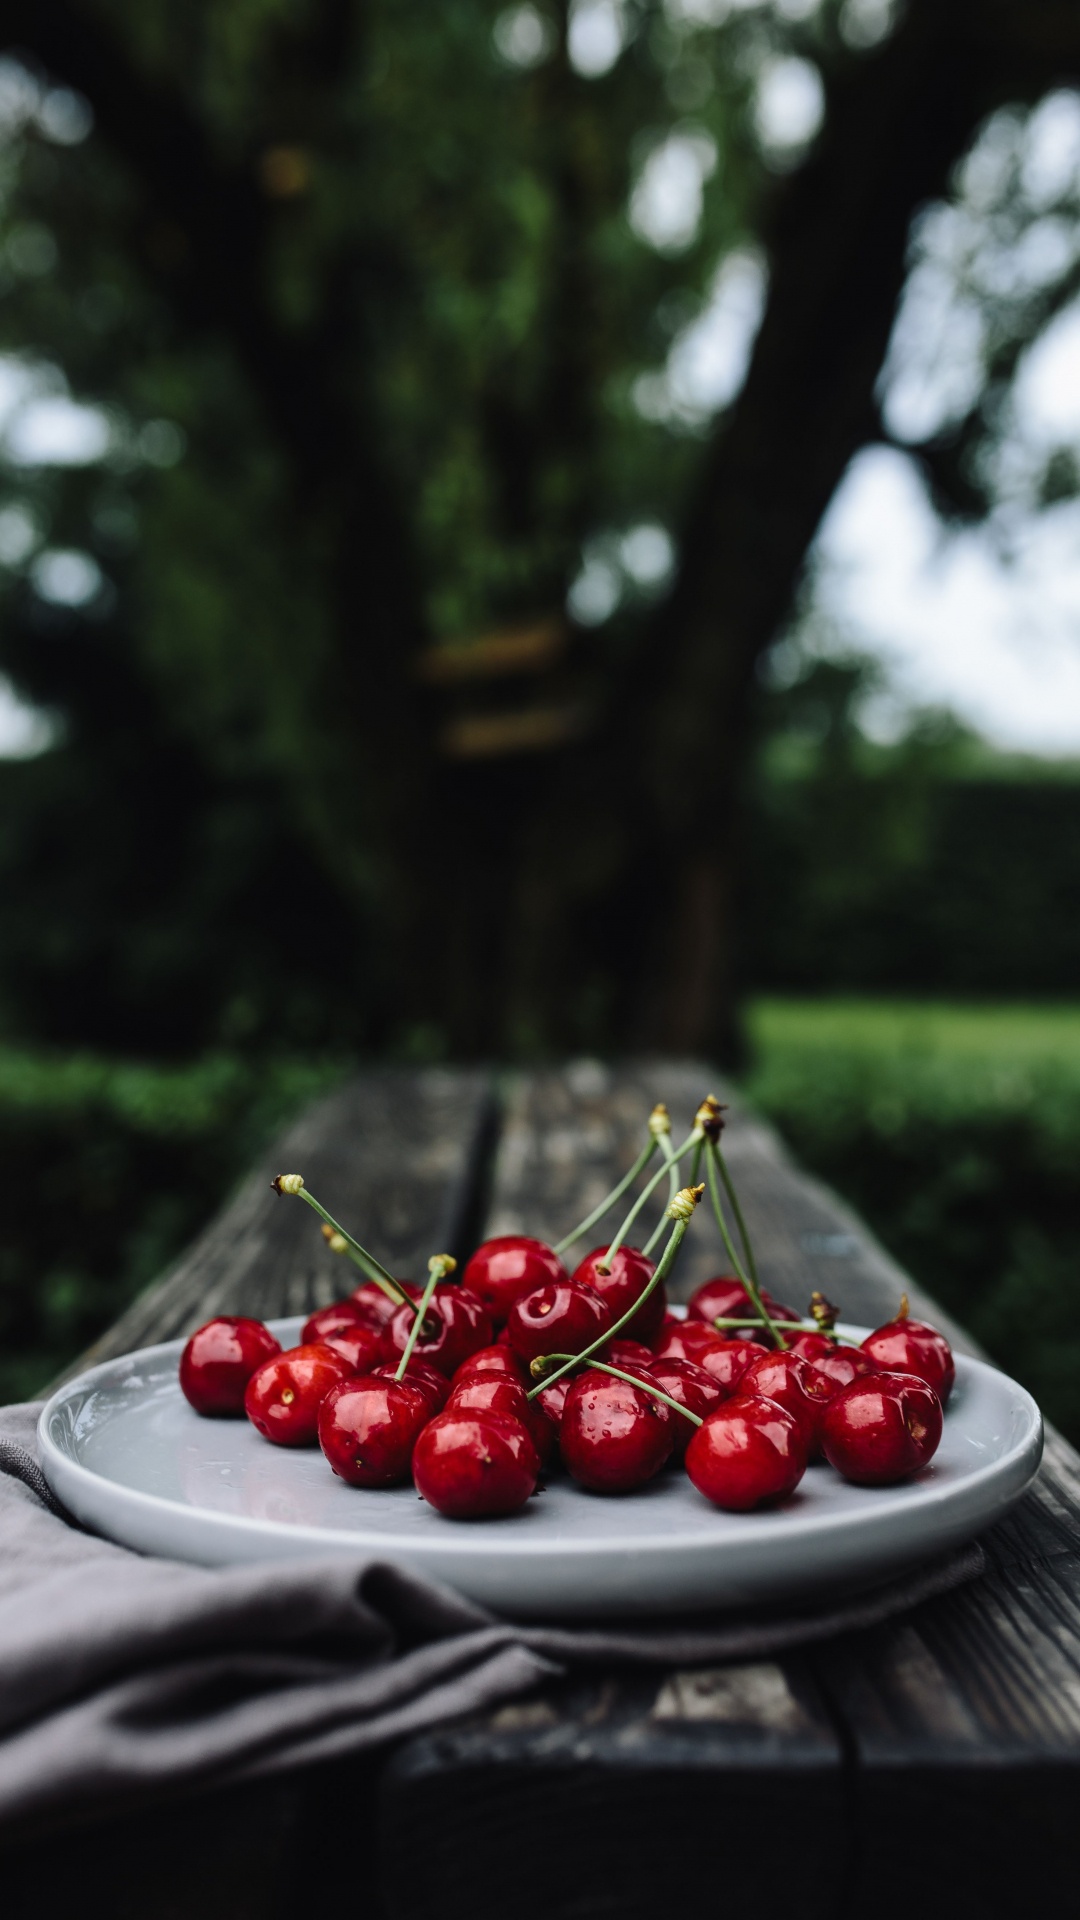 Red Cherries on White Ceramic Plate. Wallpaper in 1080x1920 Resolution